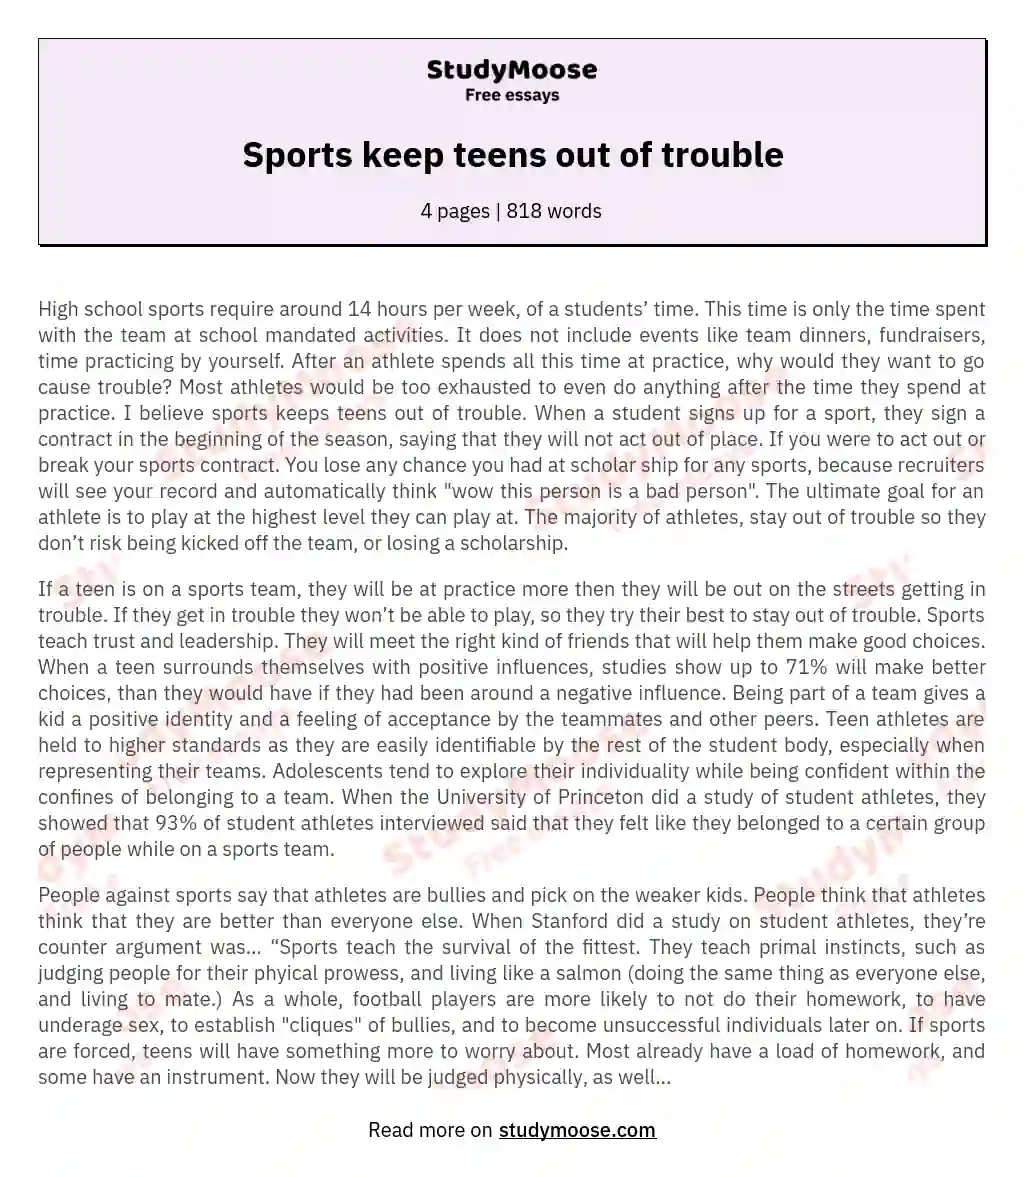 Sports keep teens out of trouble essay